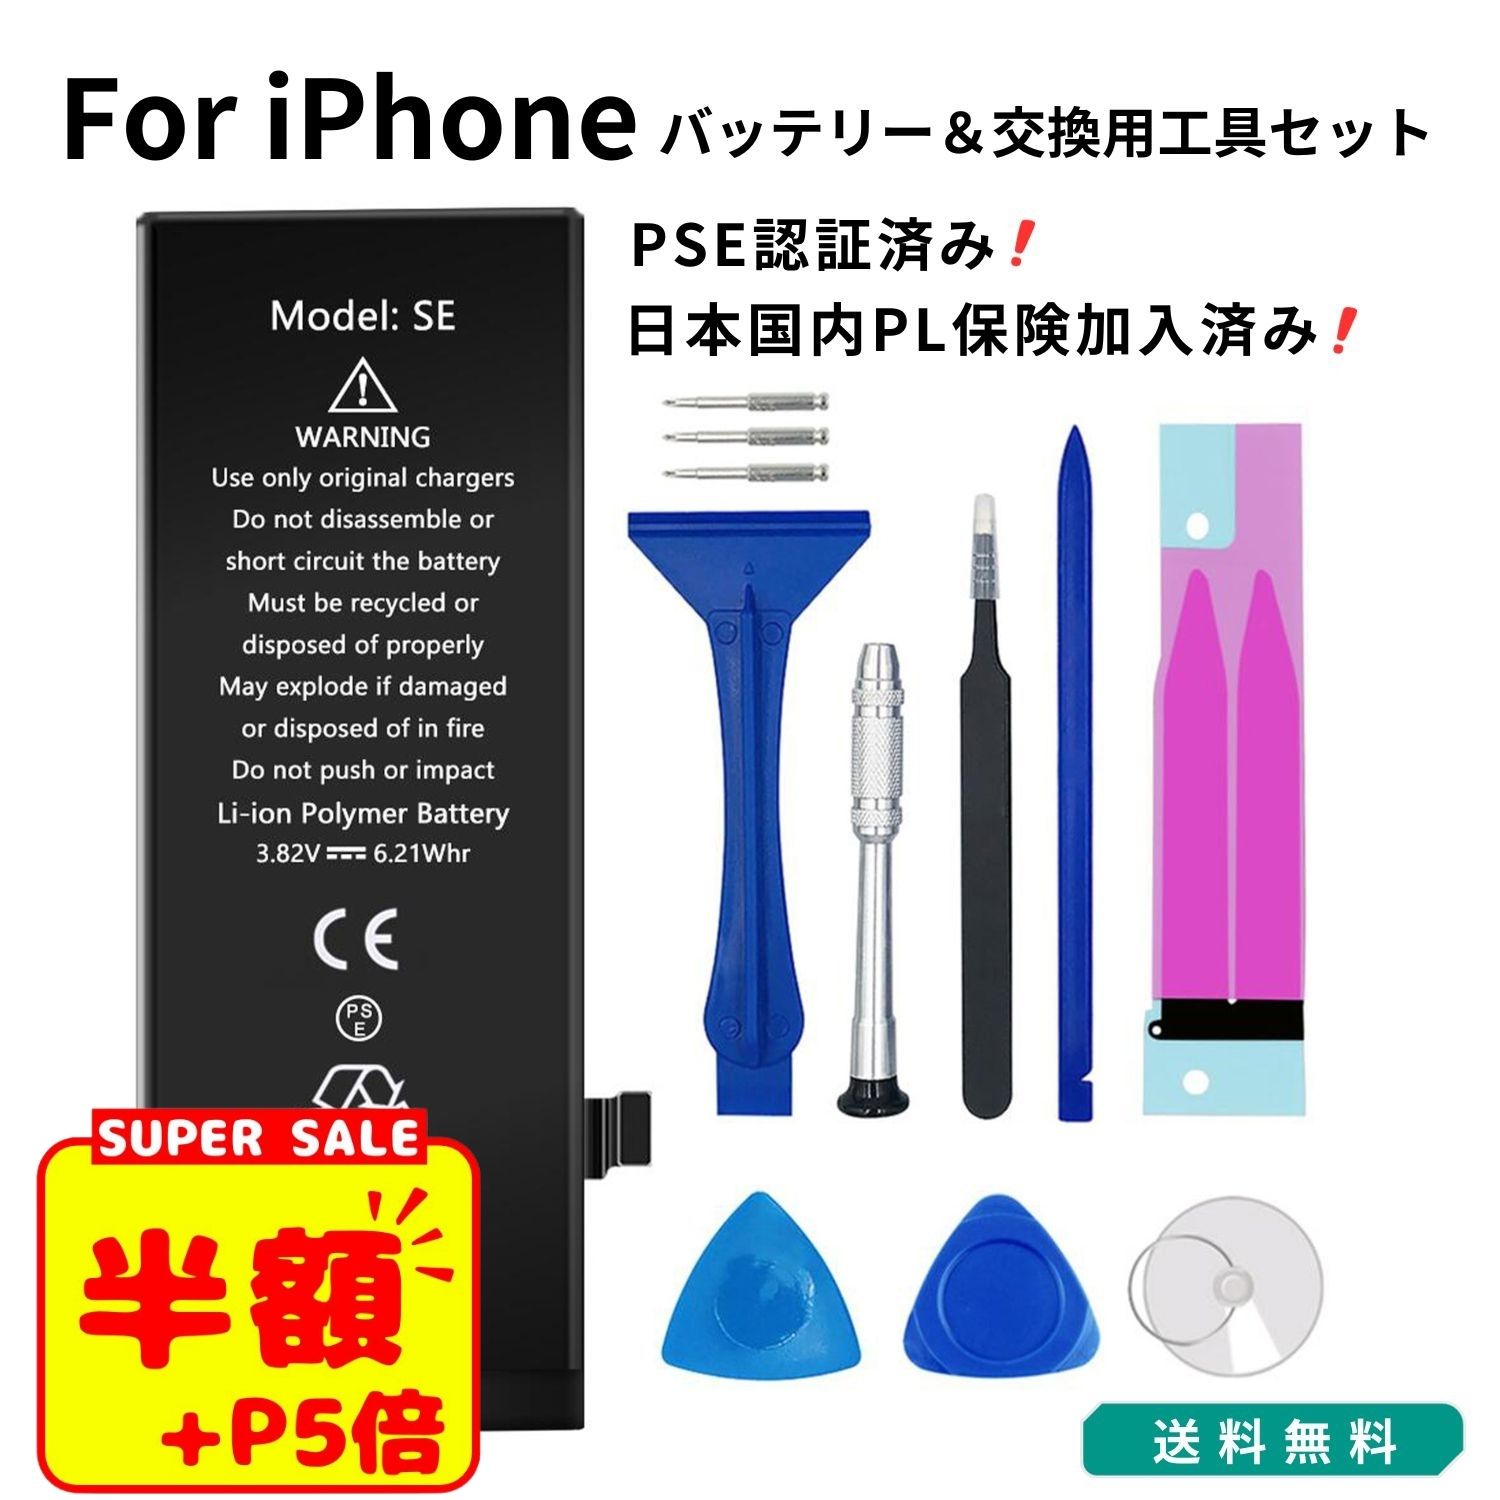 【LINE追加で5%OFFクーポン】【PSE認証済】iphone バッテリー 交換キット 互換バッテリー 電池交換 30日間保証 iphone5 iphone5c iphone5s iphone6 iphone6s iphone6p iphone6sp iphone7 iphon…